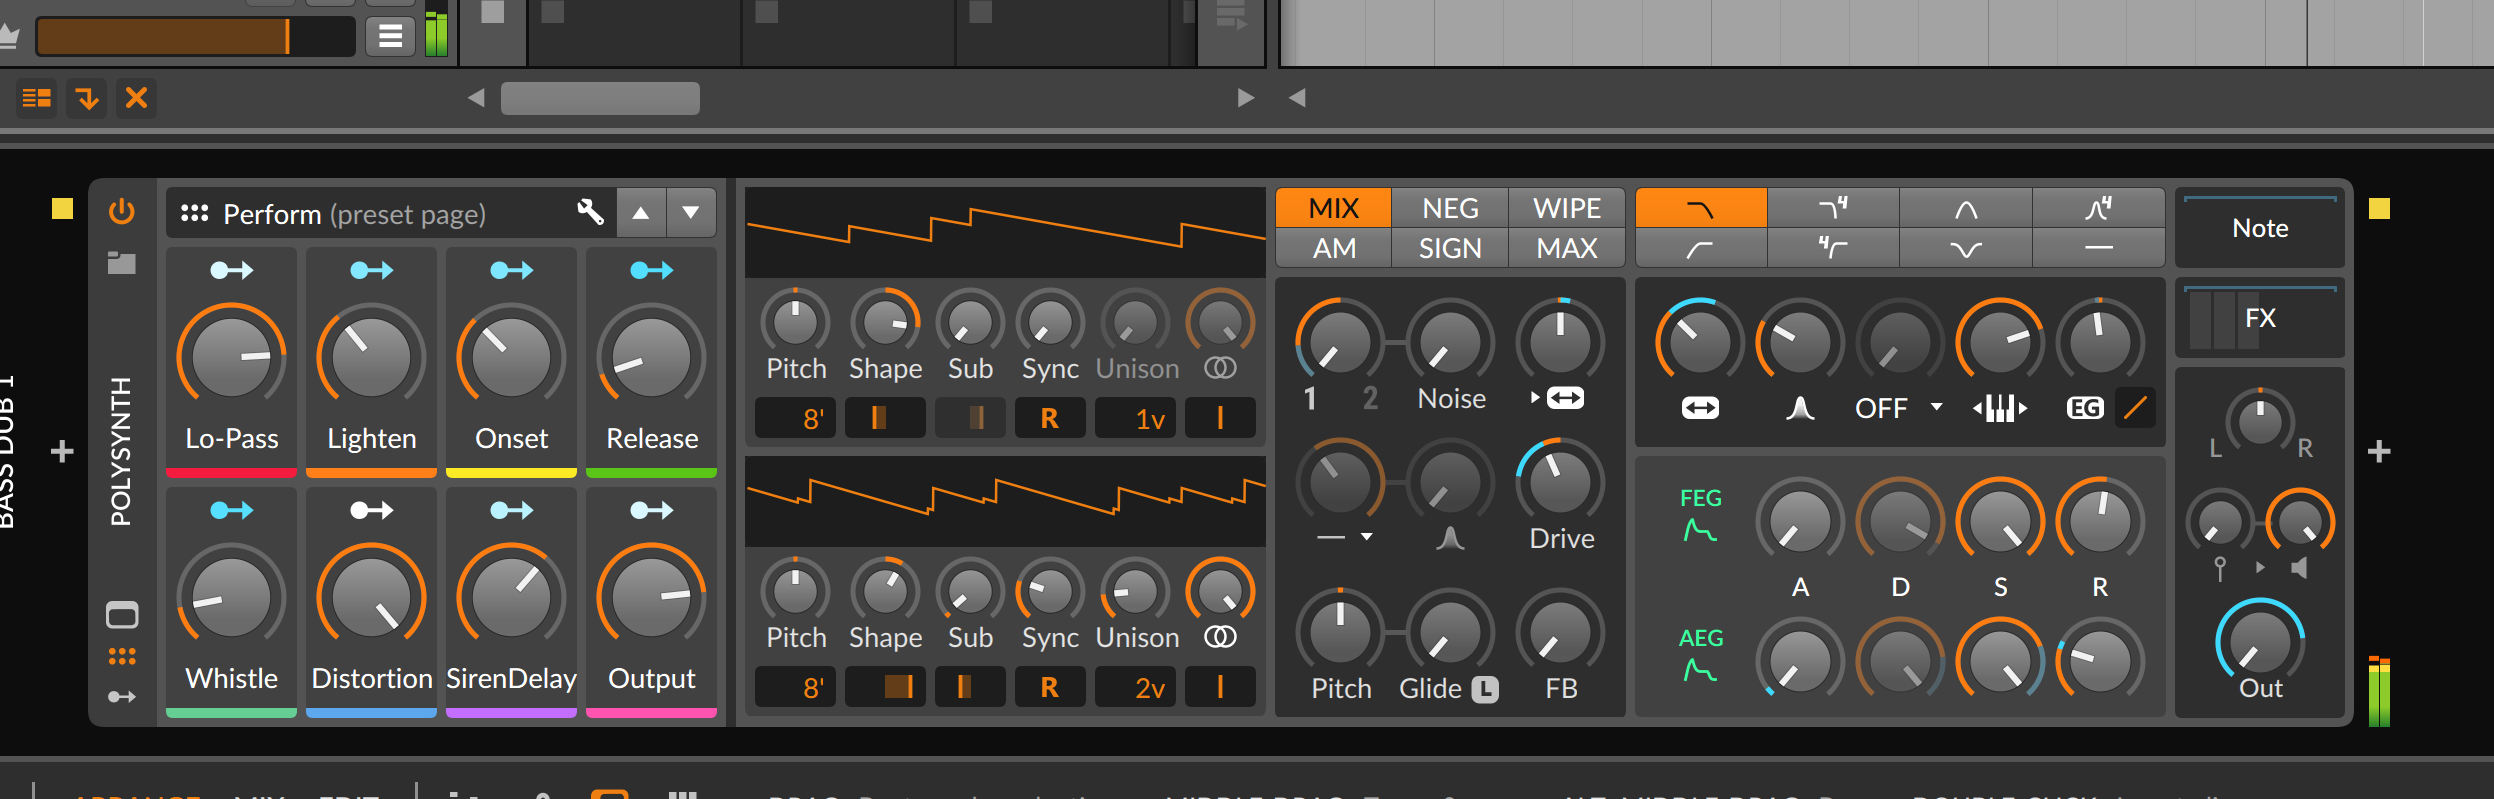 Bitwig Studio (upgrade From Essentials/16 Track) - Sequencer sofware - Variation 3